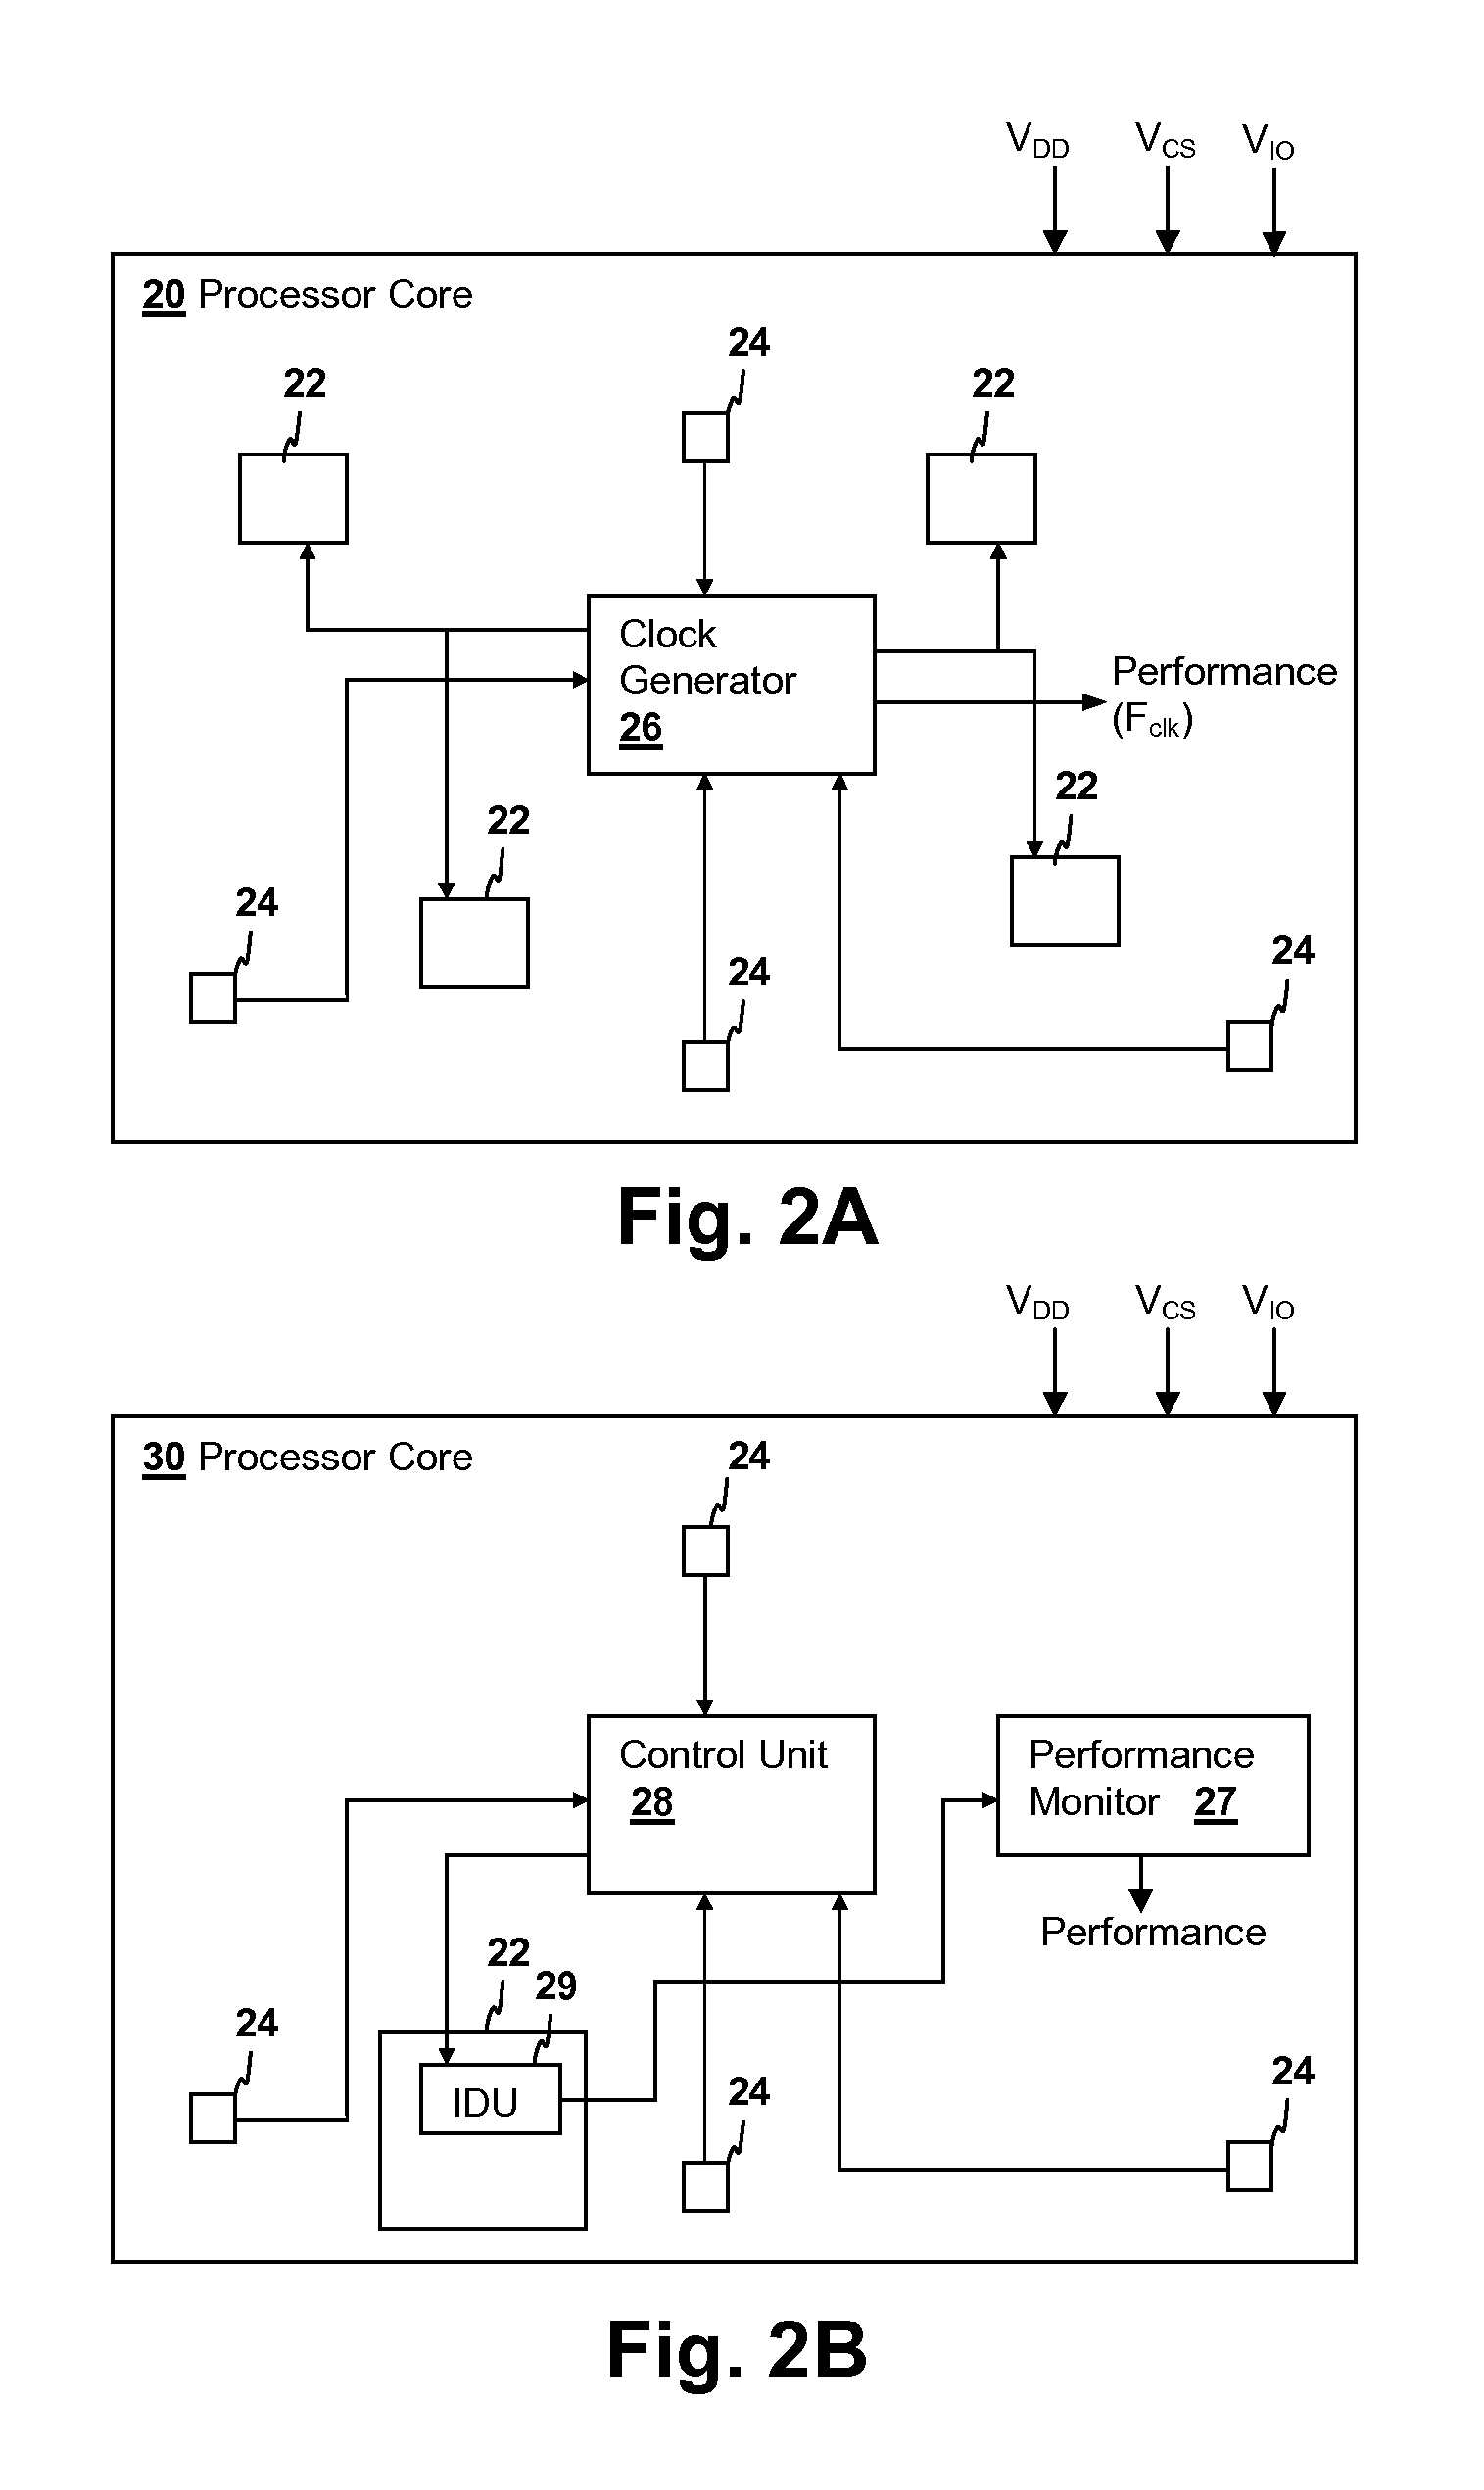 Performance control of frequency-adapting processors by voltage domain adjustment